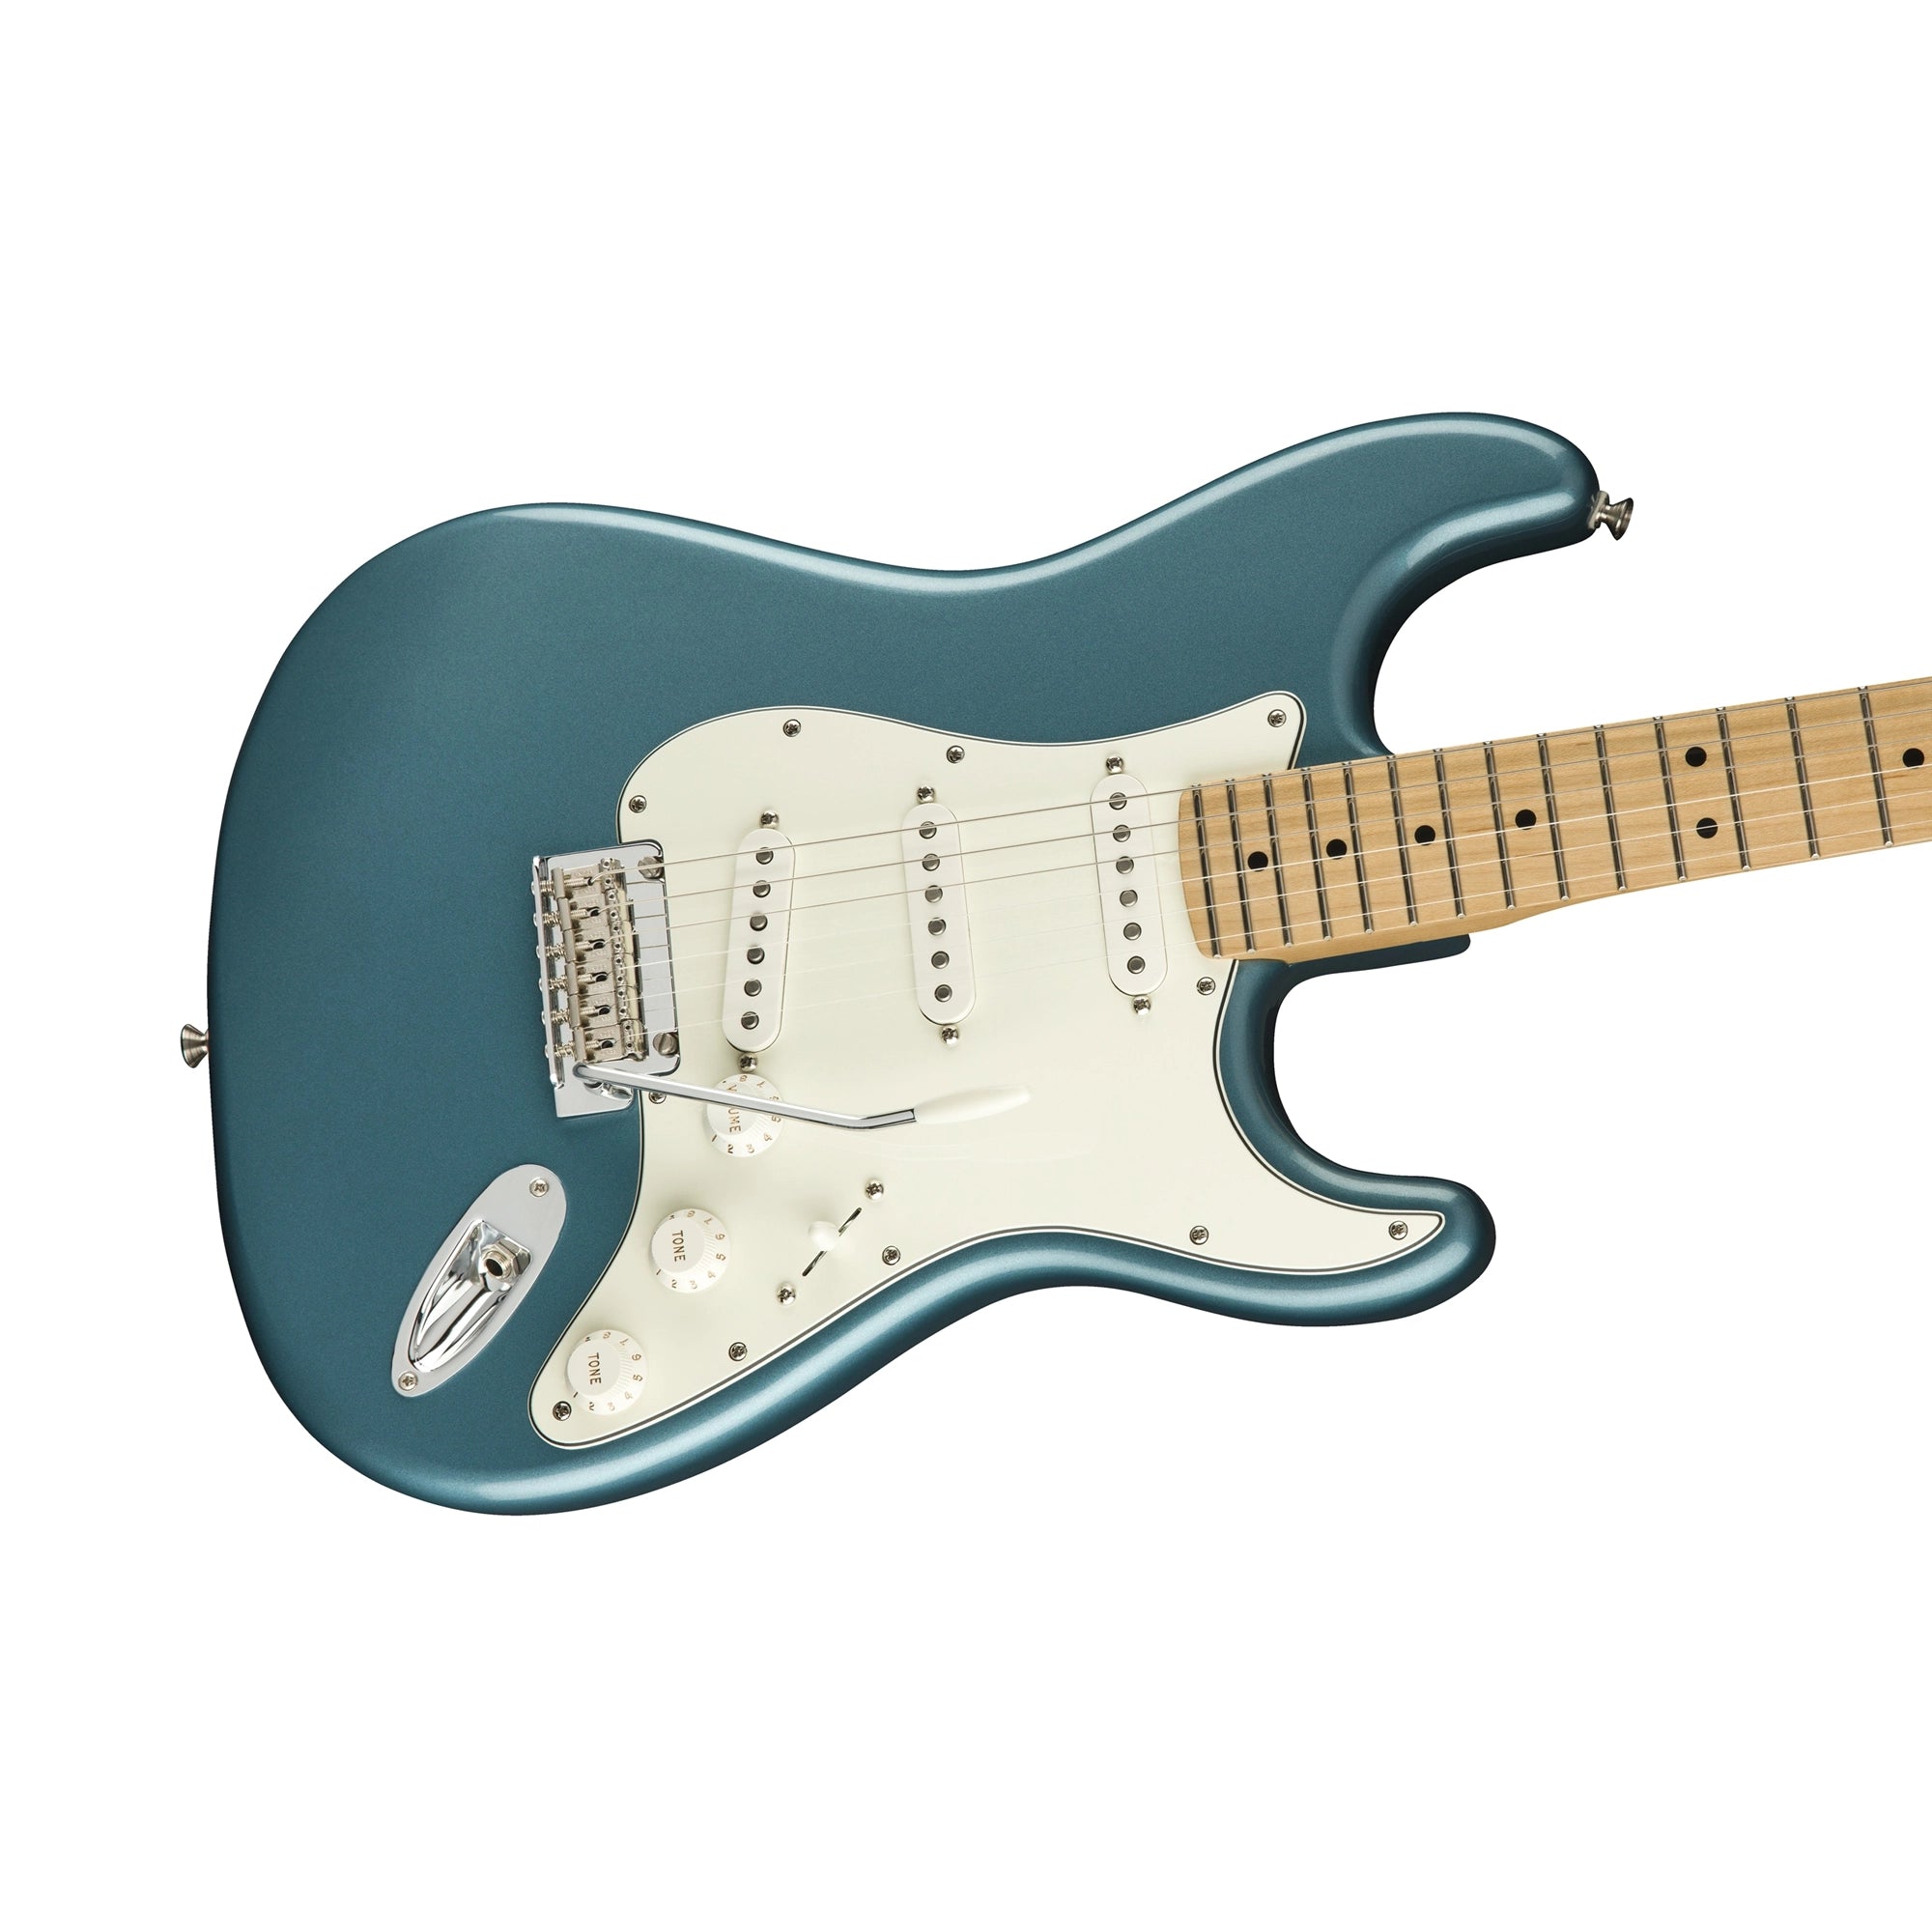 Fender Player Stratocaster Maple Fingerboard Electric Guitar - Tidepool